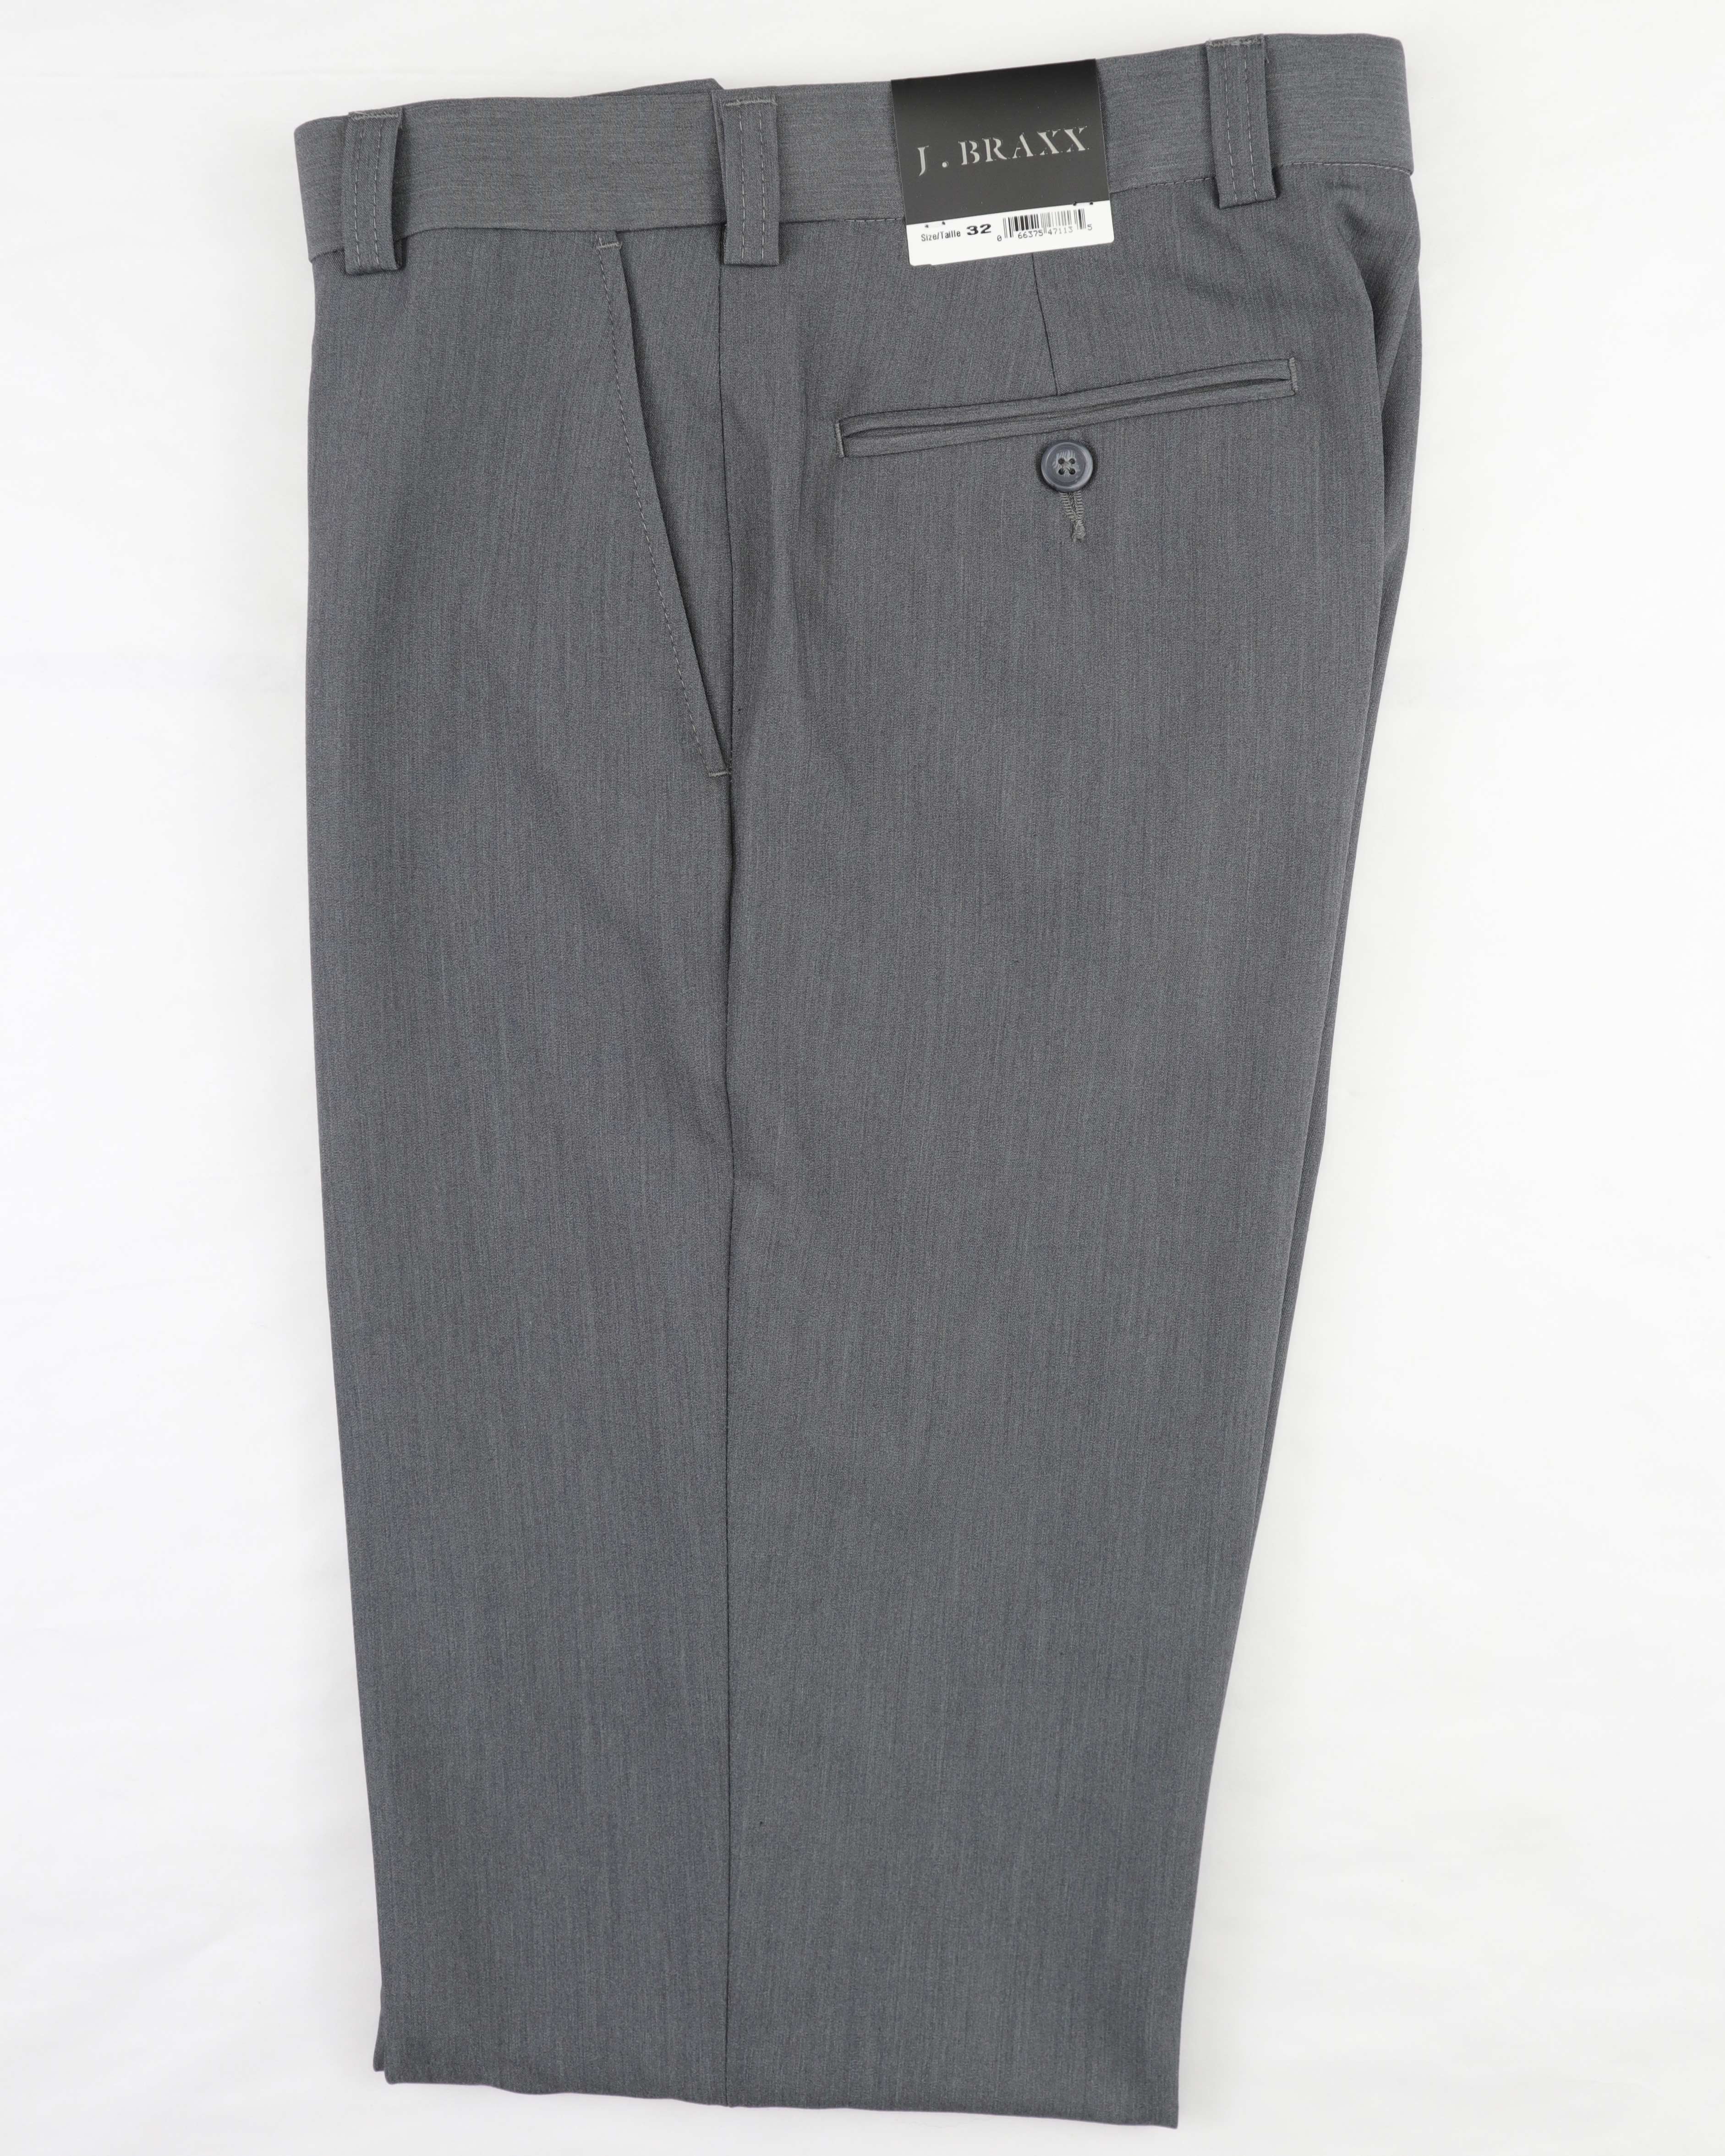 J. Braxx - Golf or Casual Pant - Big Fitting - 4-Way Stretch with